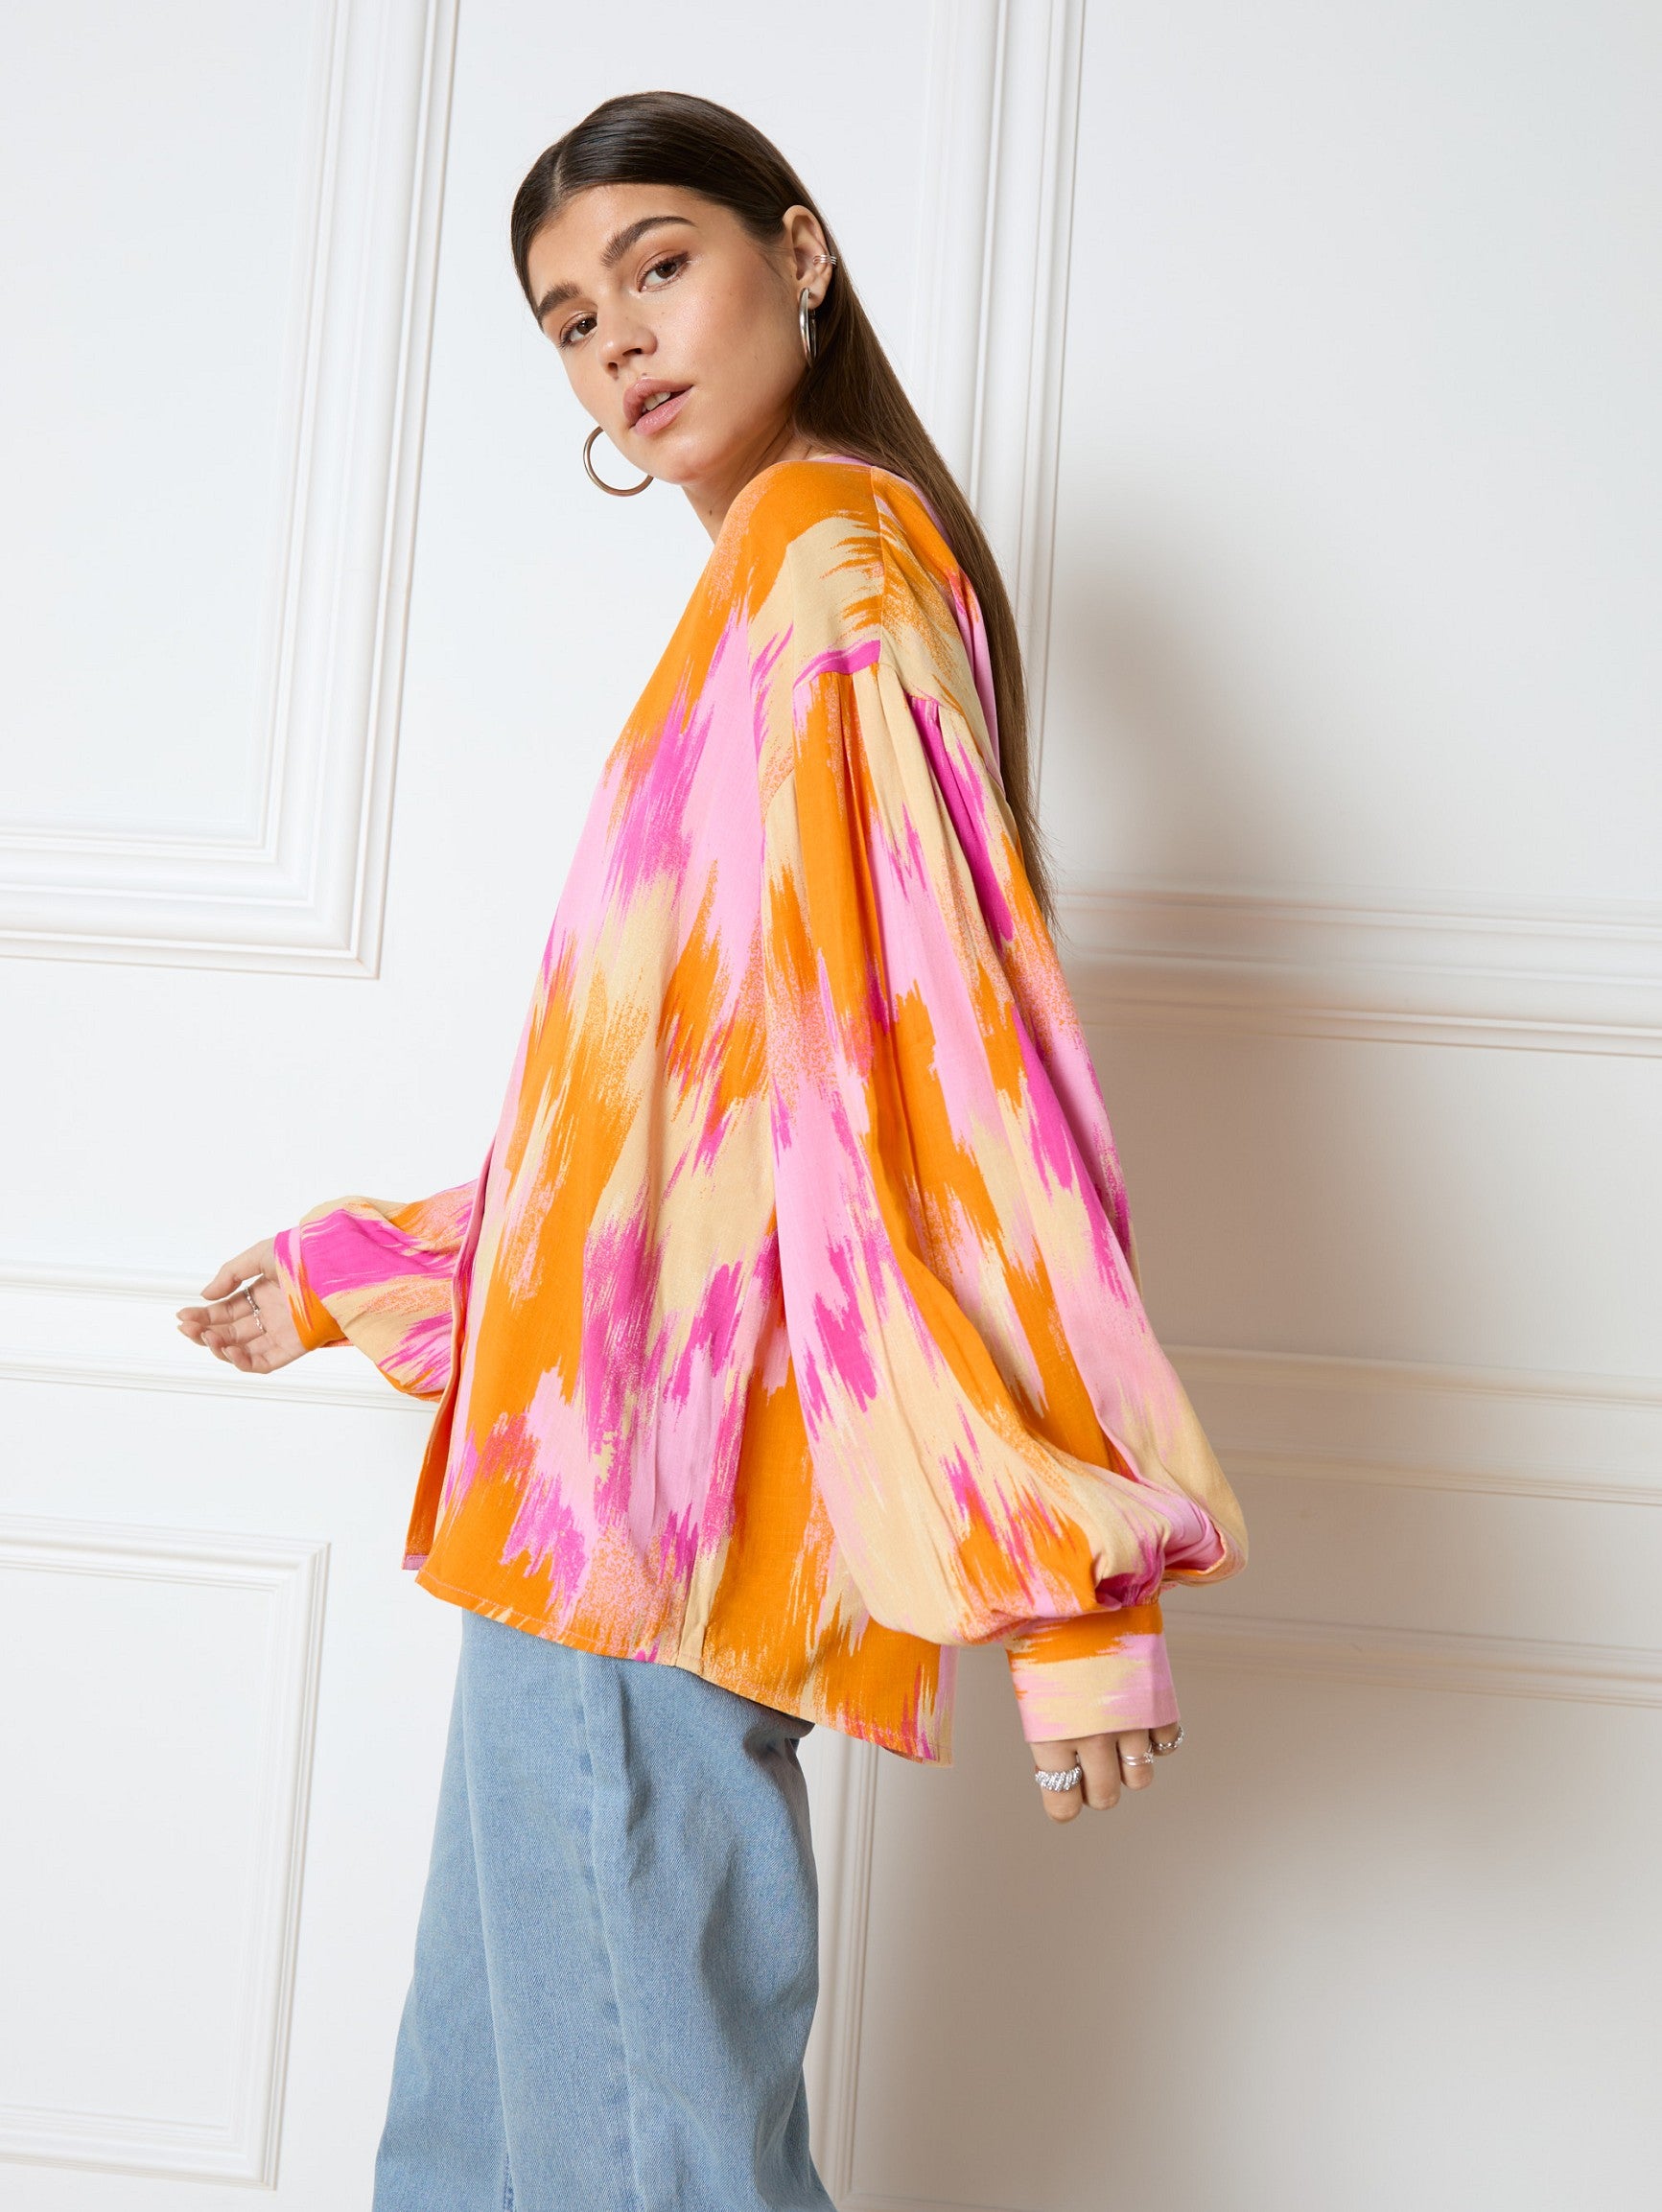 REFINED DEPARTMENT | FAYA WOVEN BLOUSE - PINK